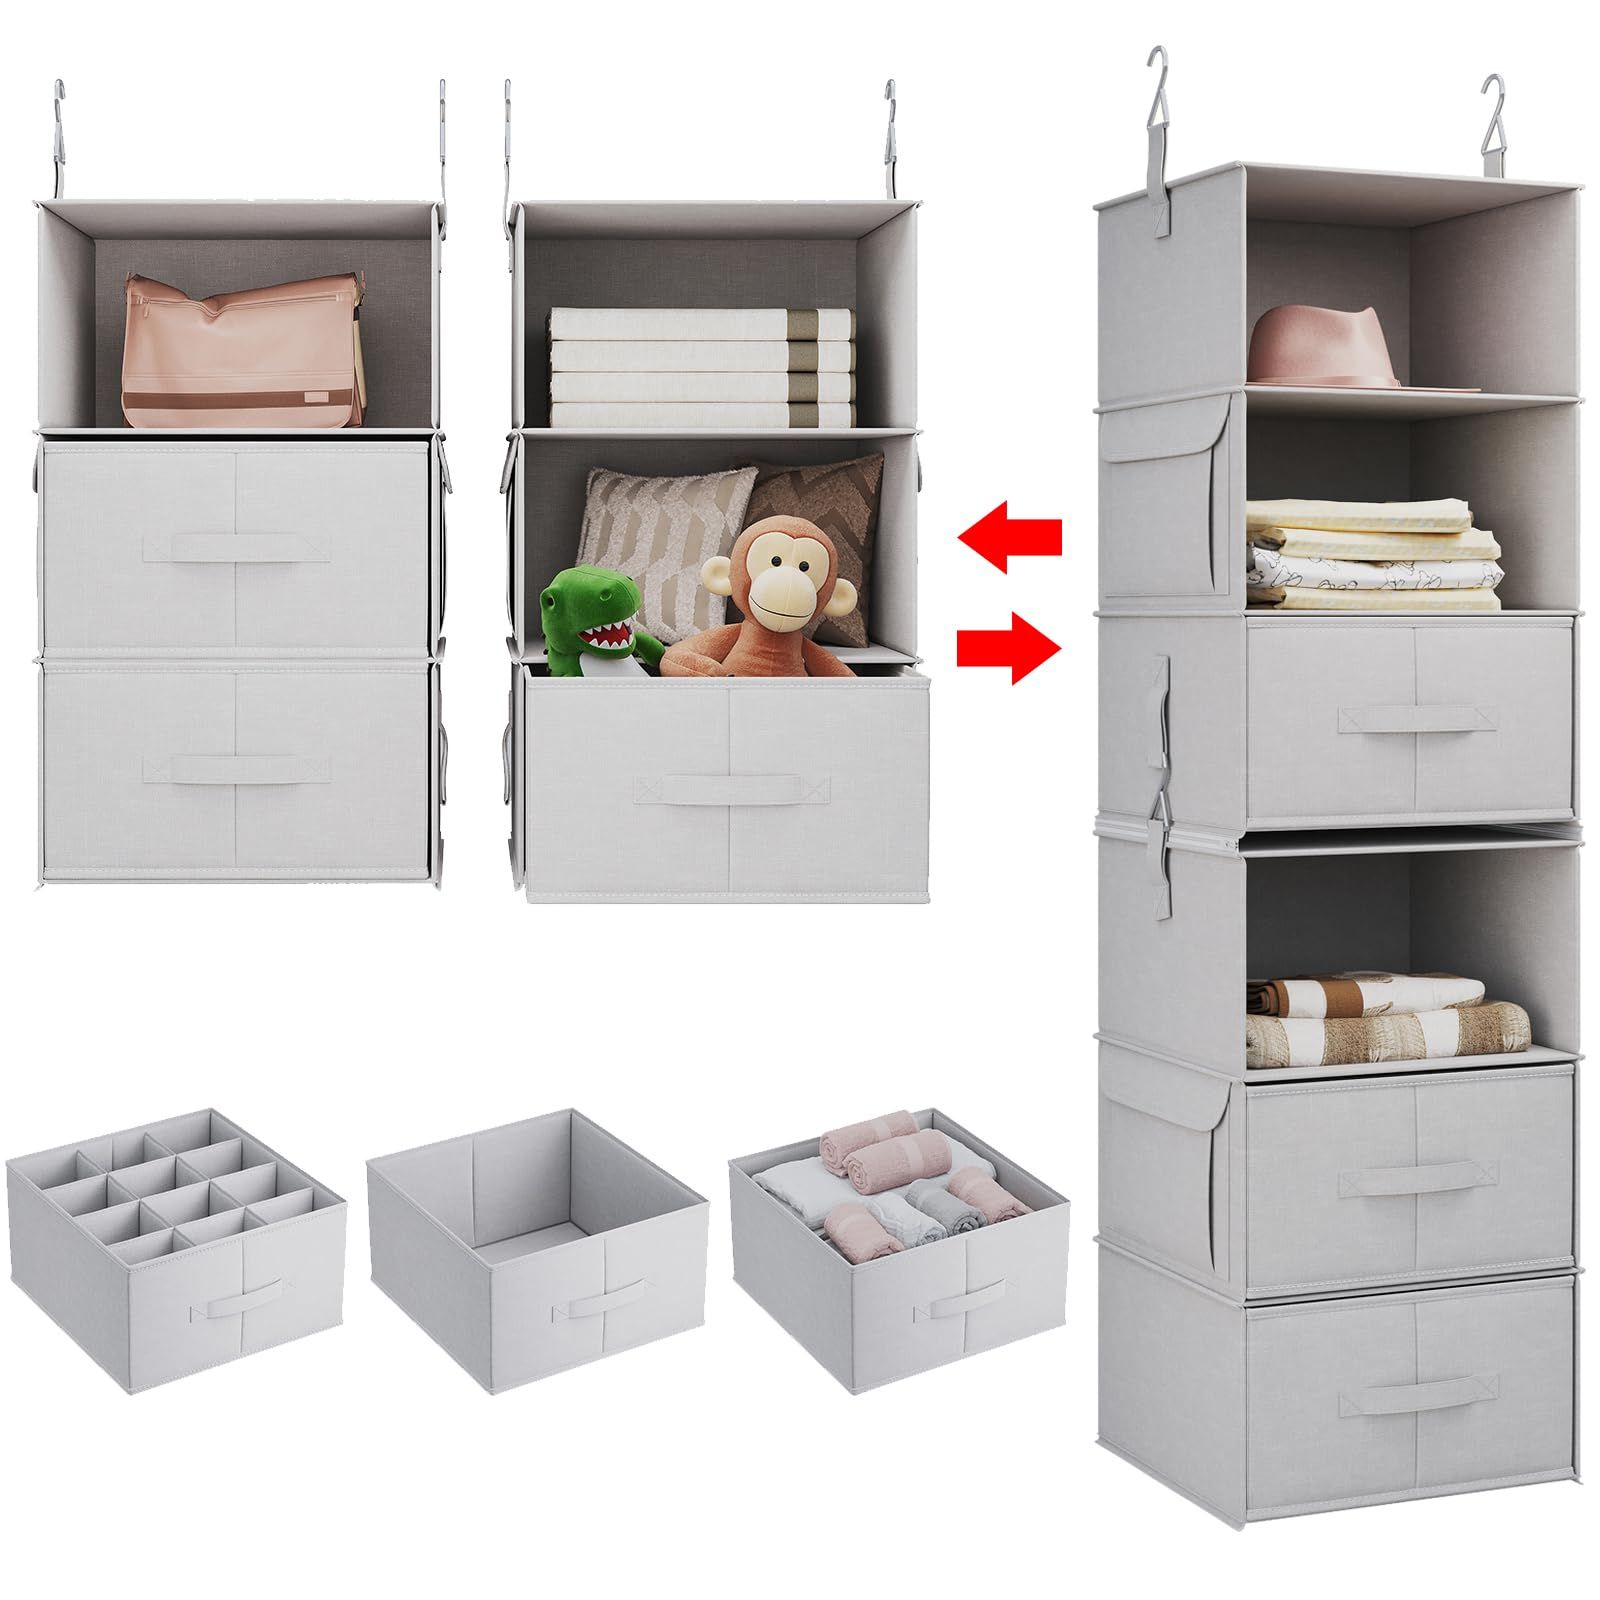 2 Separable Wardrobes Inside Well Known Amazon: Vailando 6 Shelf Hanging Closet Organizer, 2 Separable 3 Shelf  Hanging Shelves With 3 Drawers For Wardrobe, Nursery, Baby Clothes  Organization And Storage : Home & Kitchen (Photo 1 of 10)